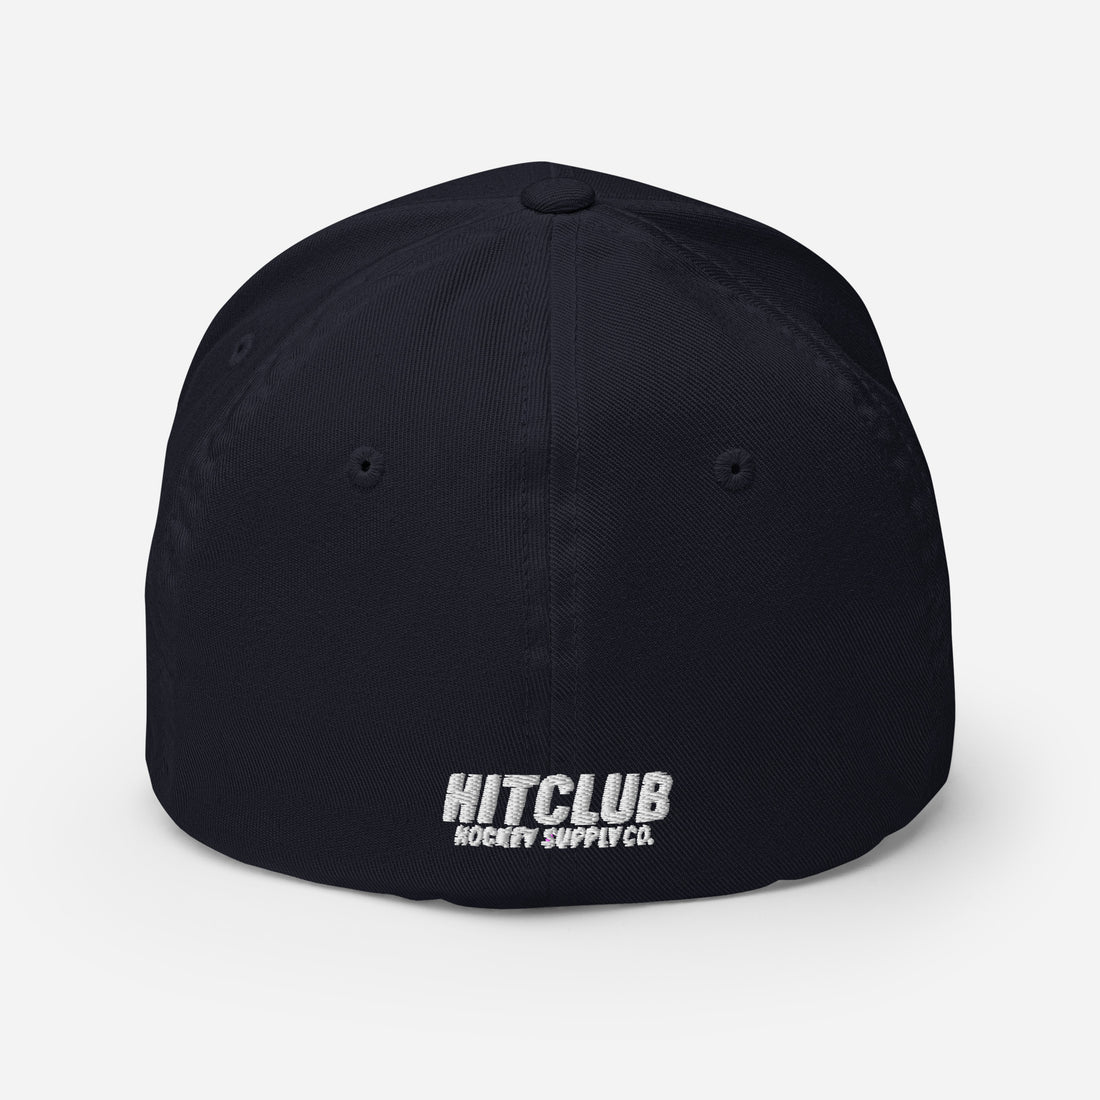 Five For Fighting Podcast x Hitclub Hockey – Hat